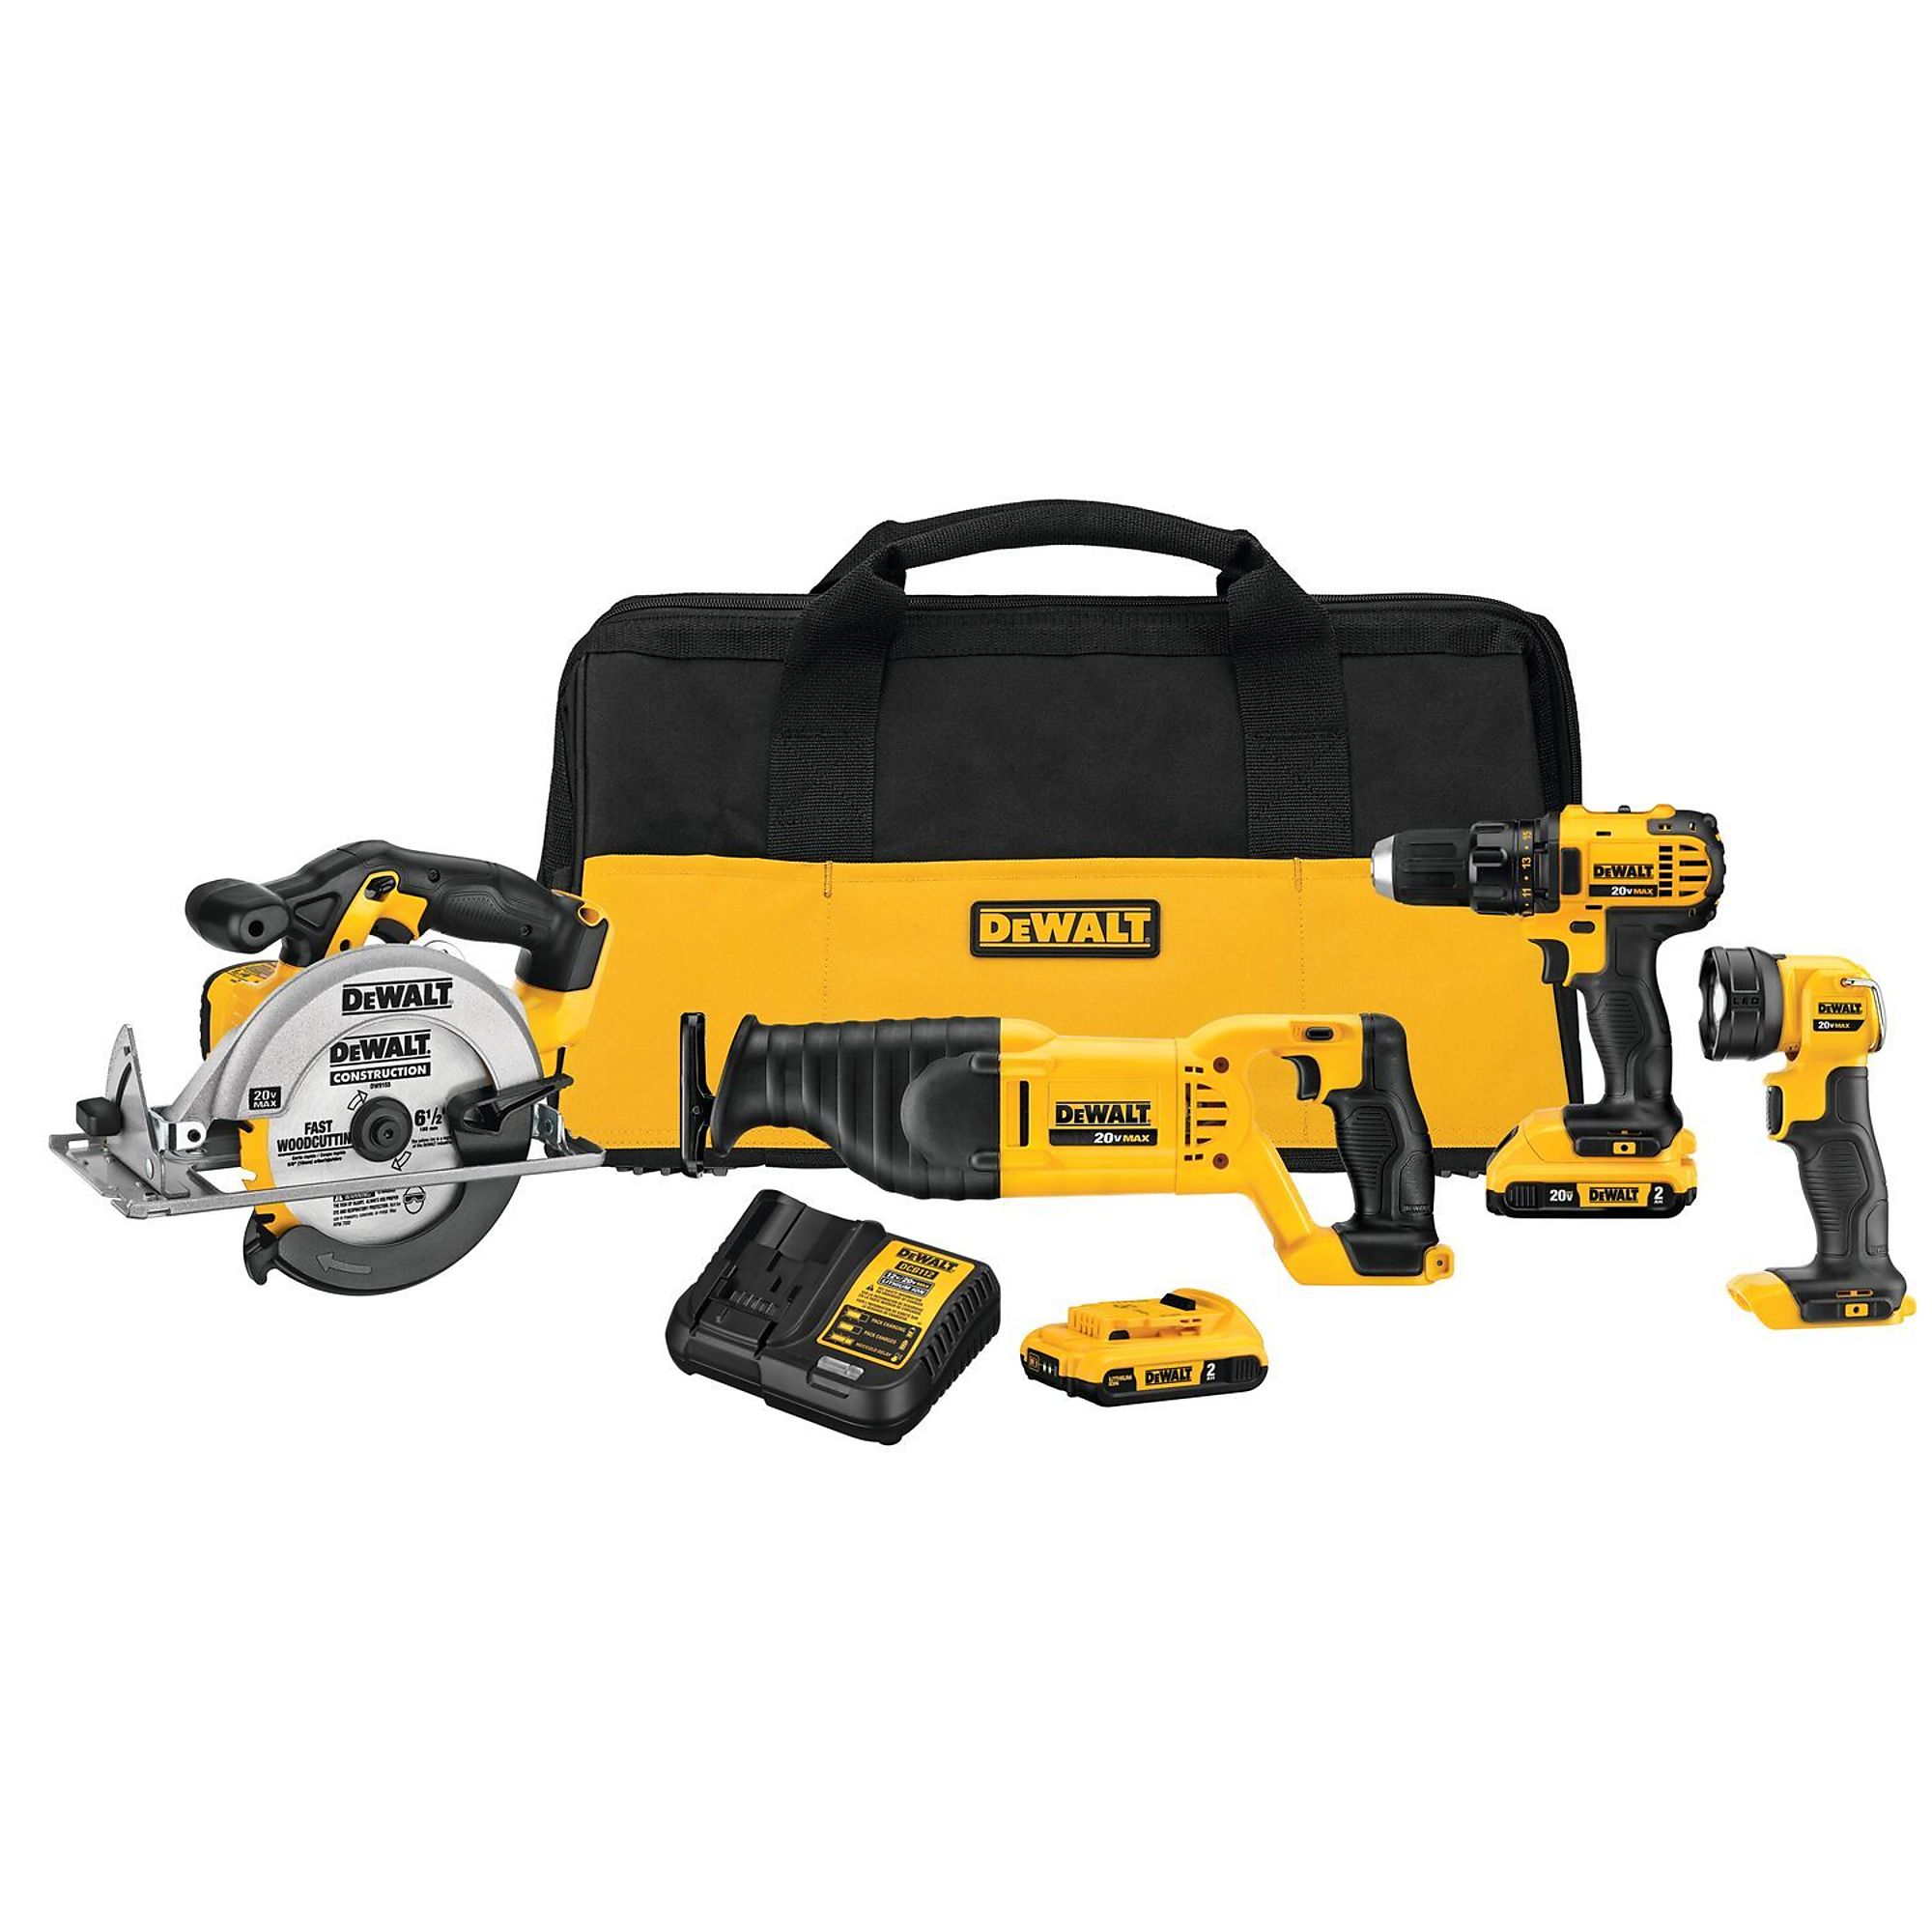 DEWALT, 20V MAX* Combo Kit, Compact 4-Tool, Chuck Size 1/2 in, Tools Included (qty.) 4 Model DCK423D2